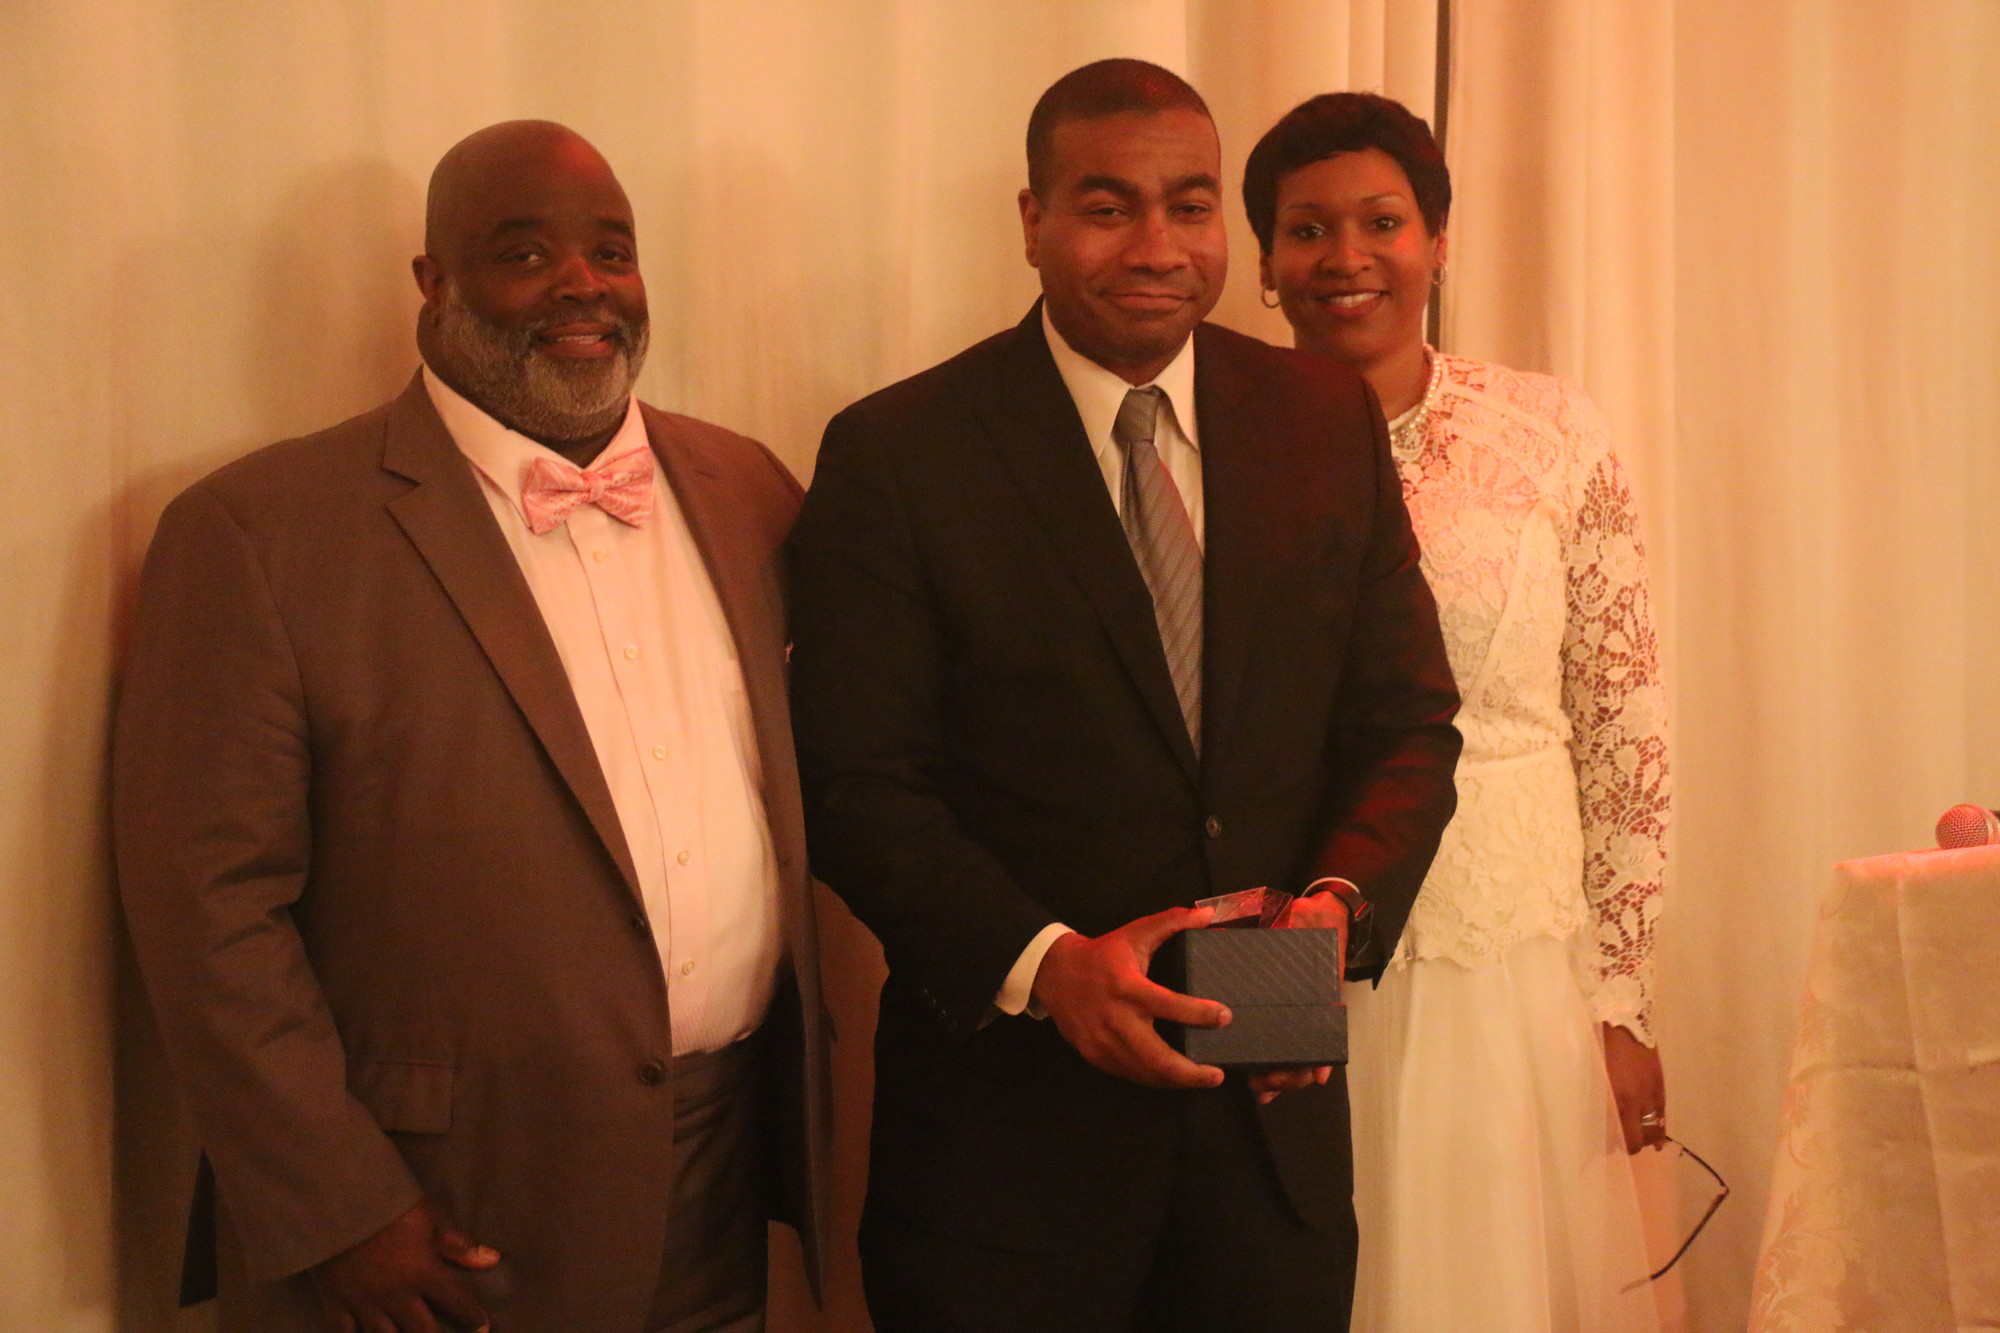 Deputy Mayor Dermond Thomas, center, was recognized for his service in village  government by Philip Jones and the Rev. Kymberley Clemons-Jones.